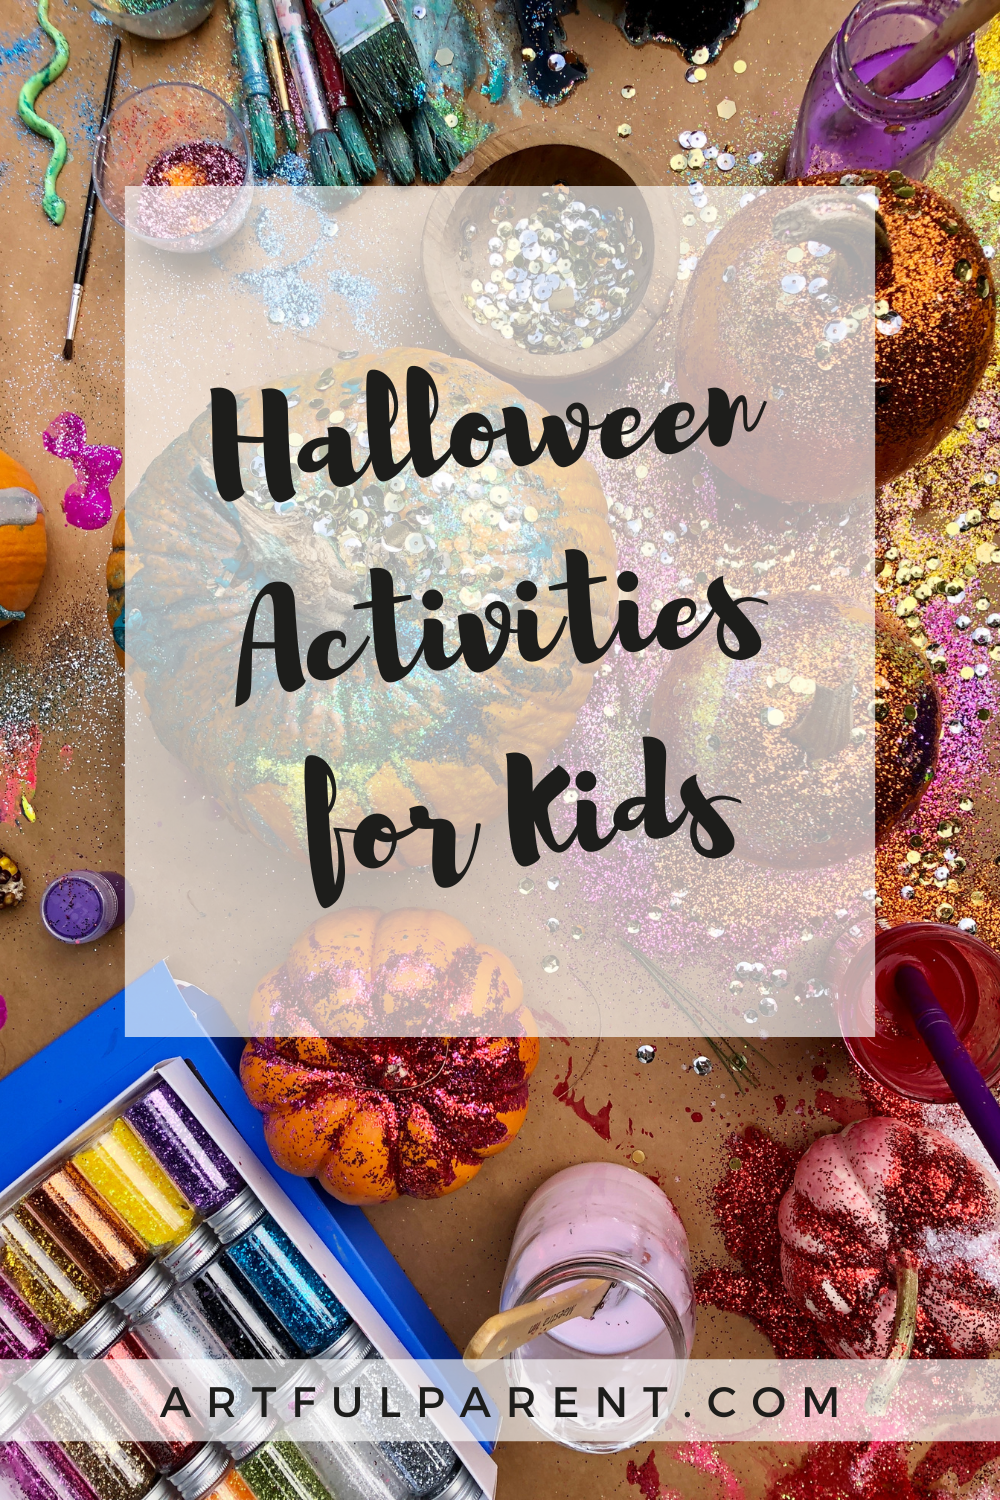 31 Days of Halloween Activities for Kids (with Printable List!)